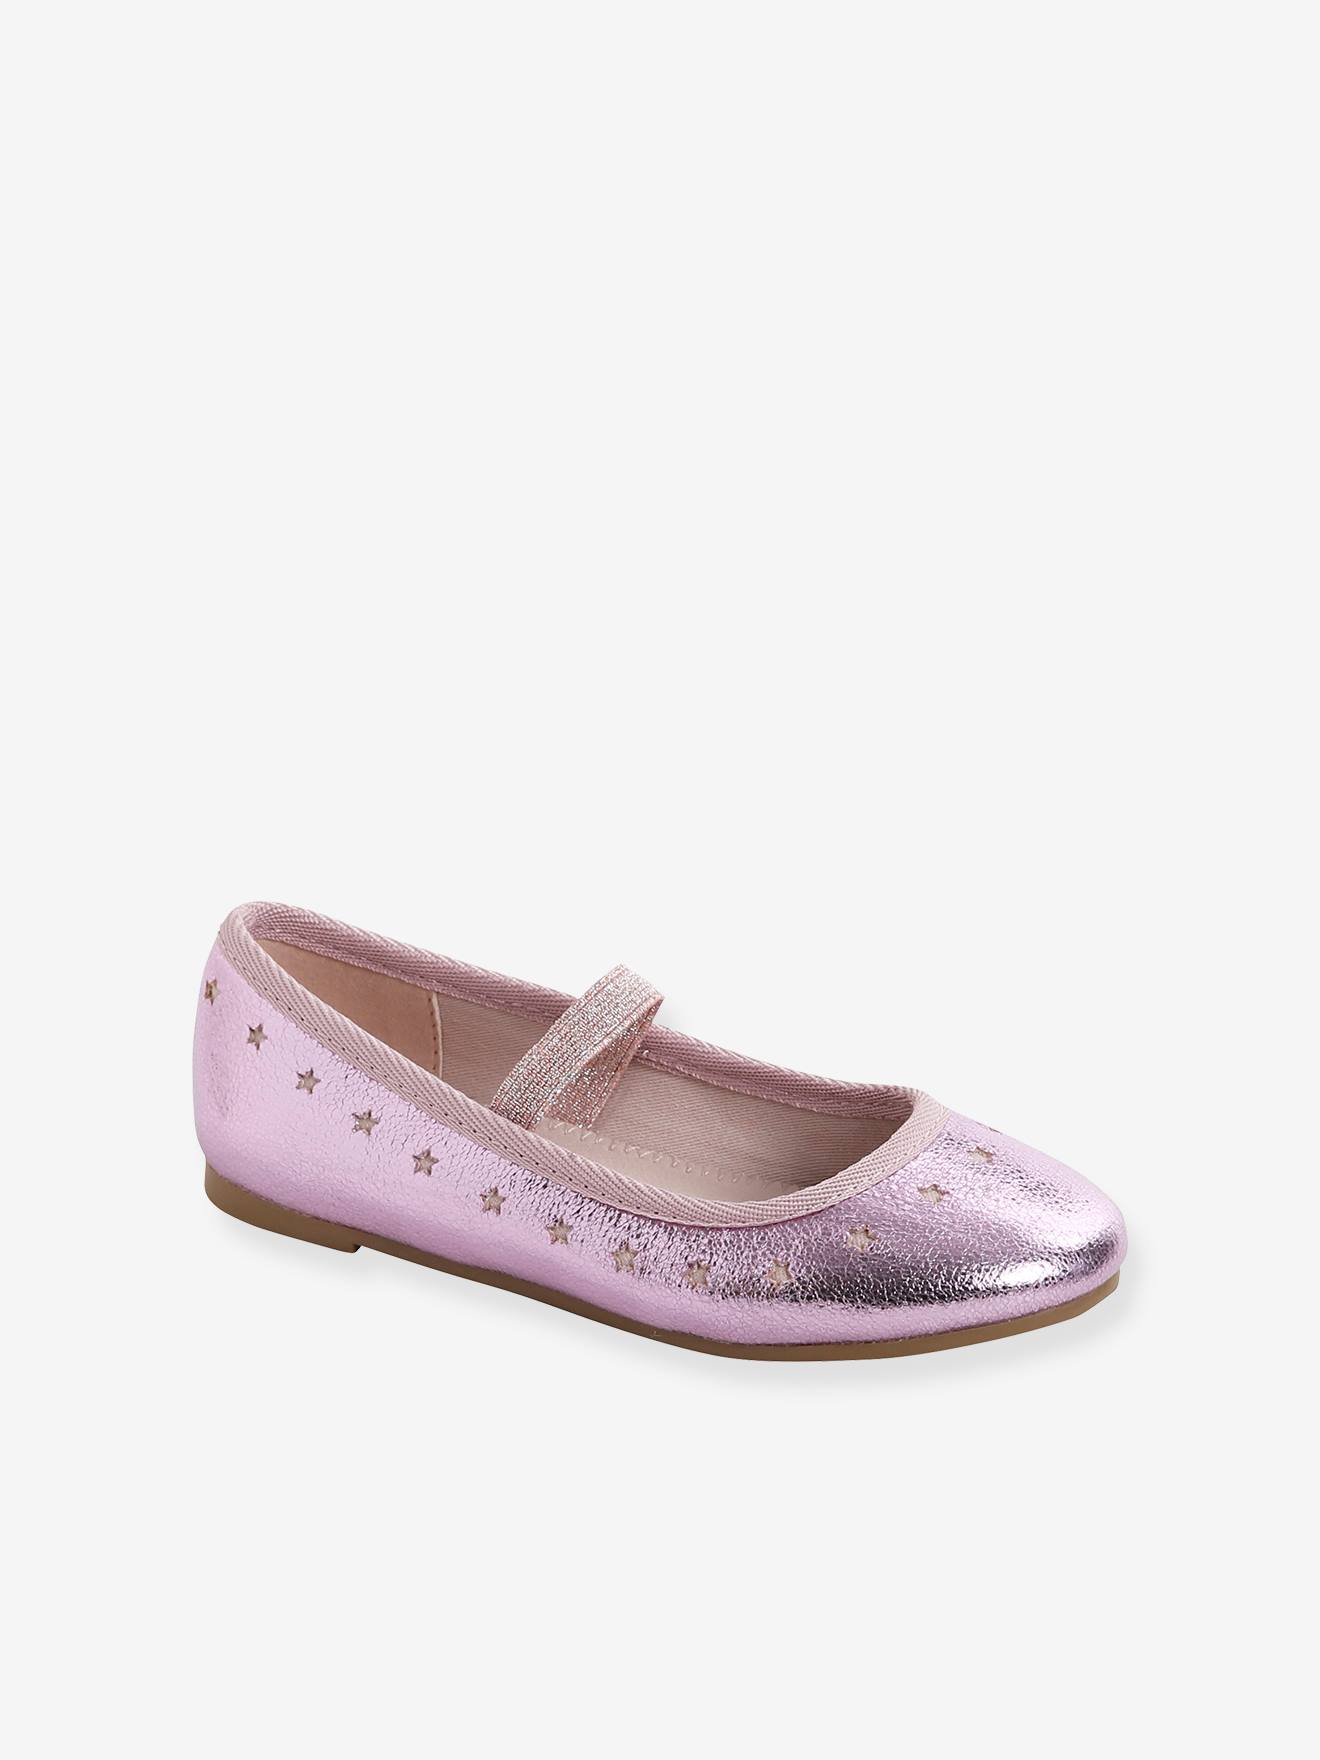 Iridescent Mary Jane Shoes for Girls rose